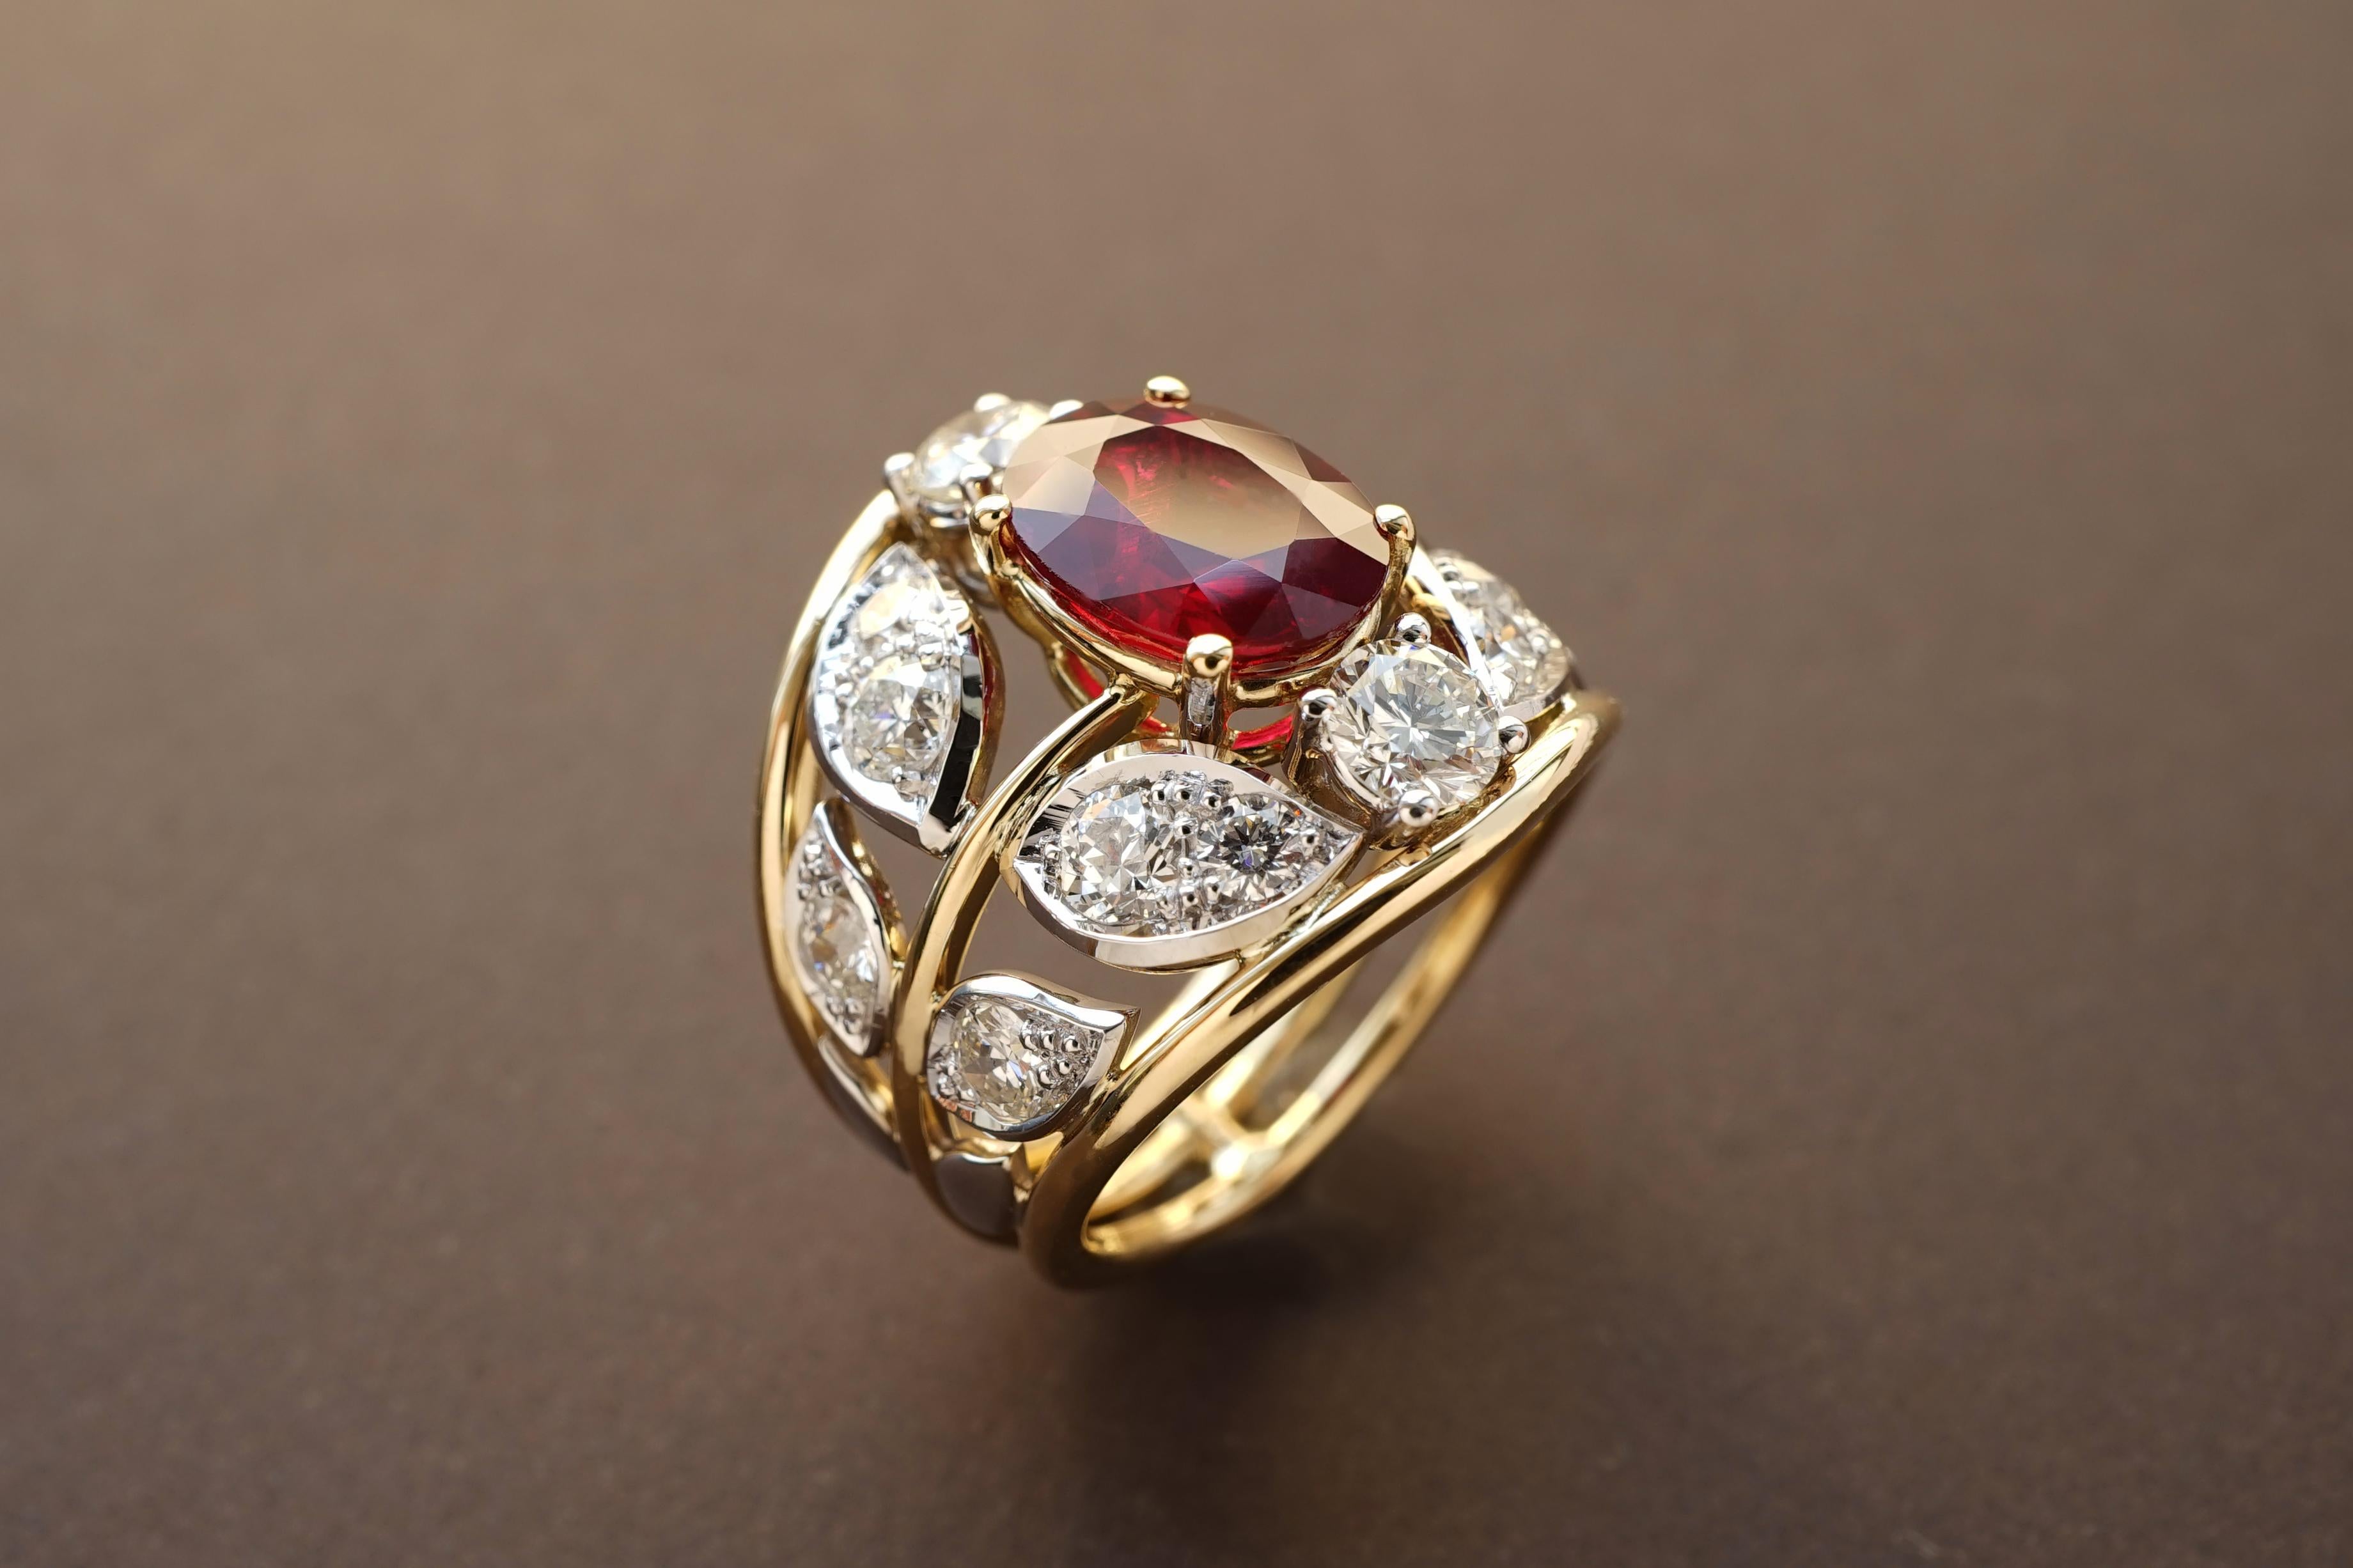 Coralie van Caloen Yellow and Gold 18k Old Cut White Diamonds and Ruby Botanical Engagement Ring is entirely hand made and forged in Belgium by experts goldsmiths therefore it is a very unique piece.

Coralie van Caloen is a Belgian jeweller &